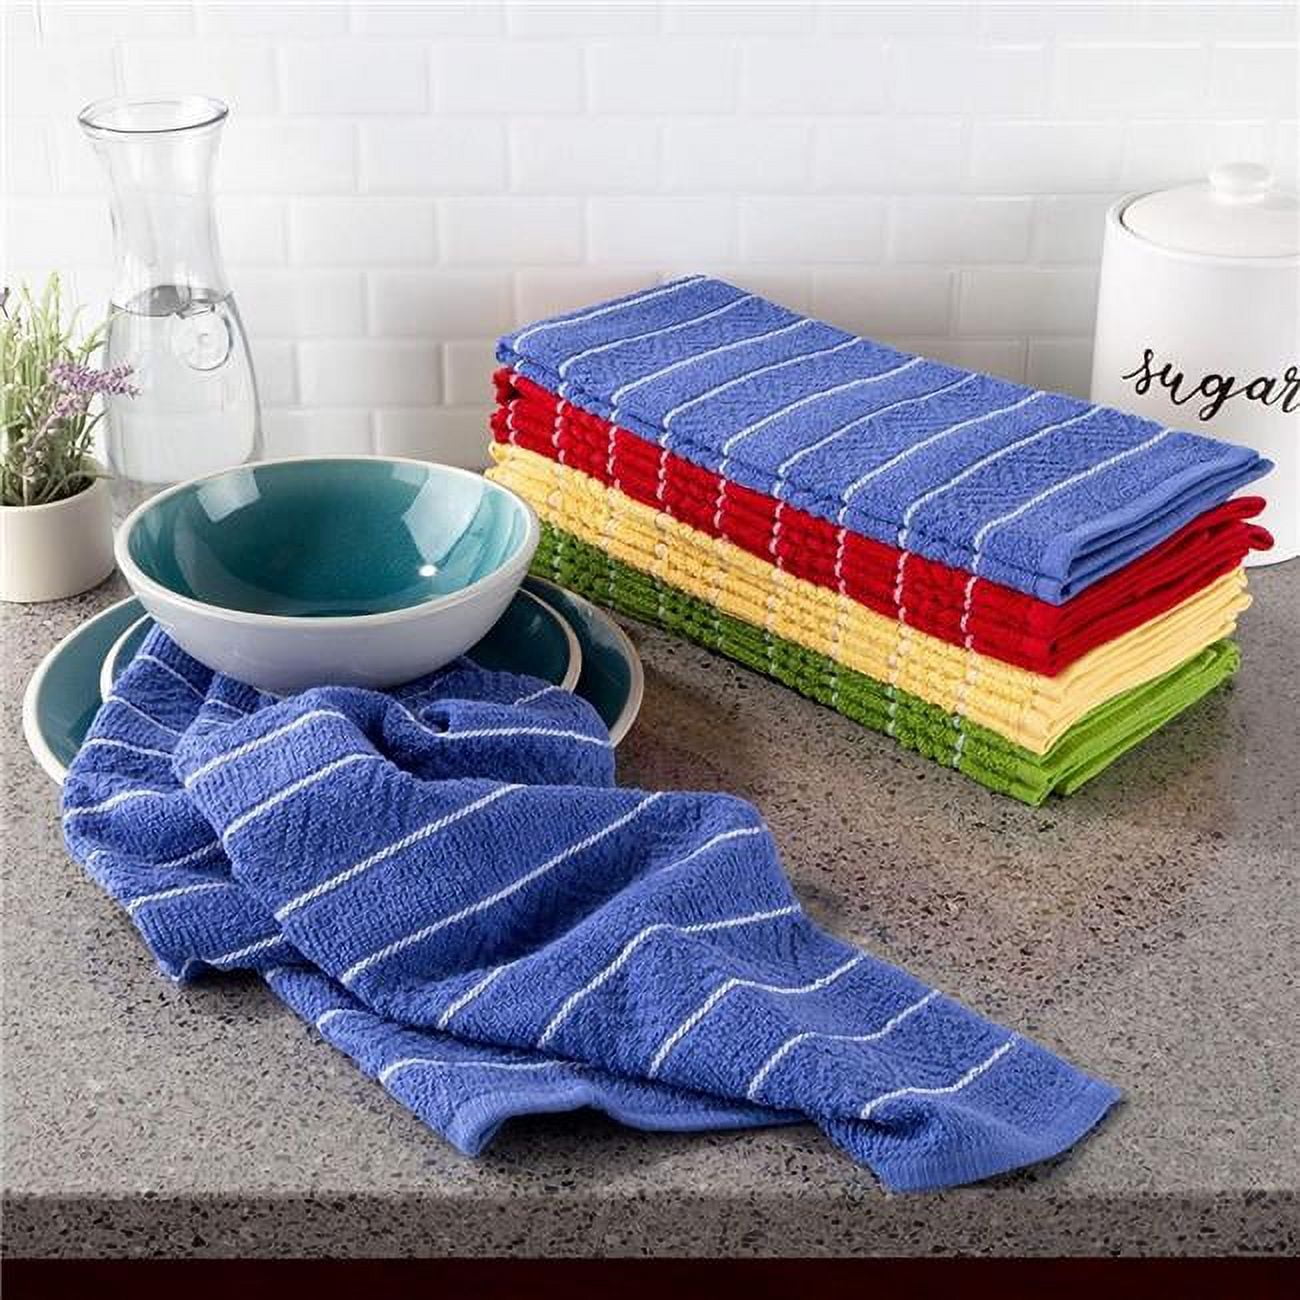 Bedford Home 69A-39314 16 x 28 in. Home Kitchen Towels, Multi